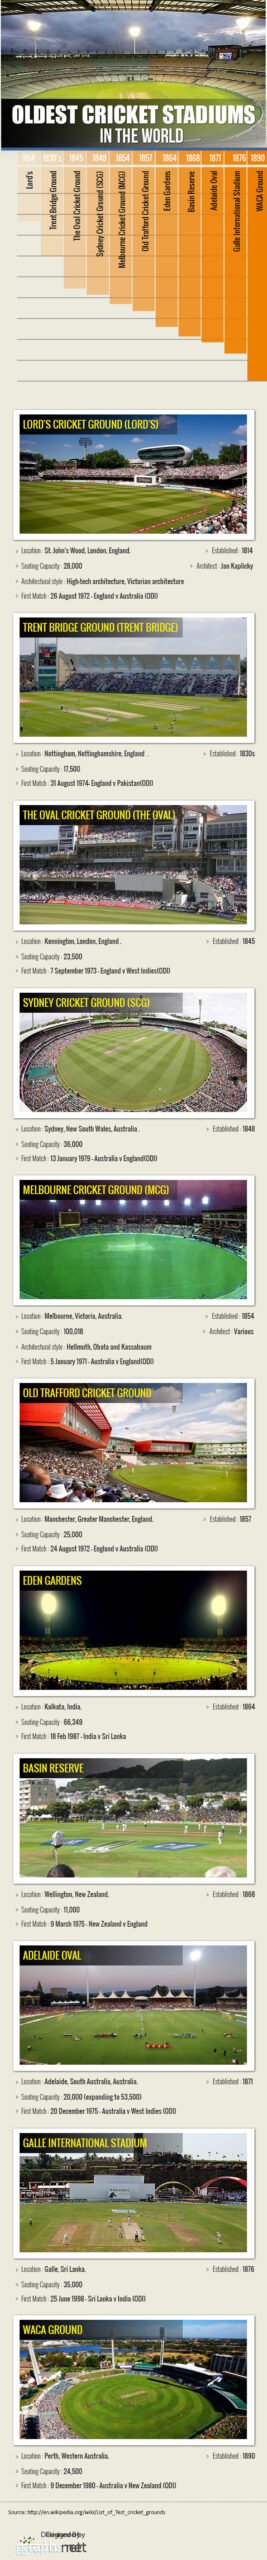 Which is the Oldest Cricket Stadium in India